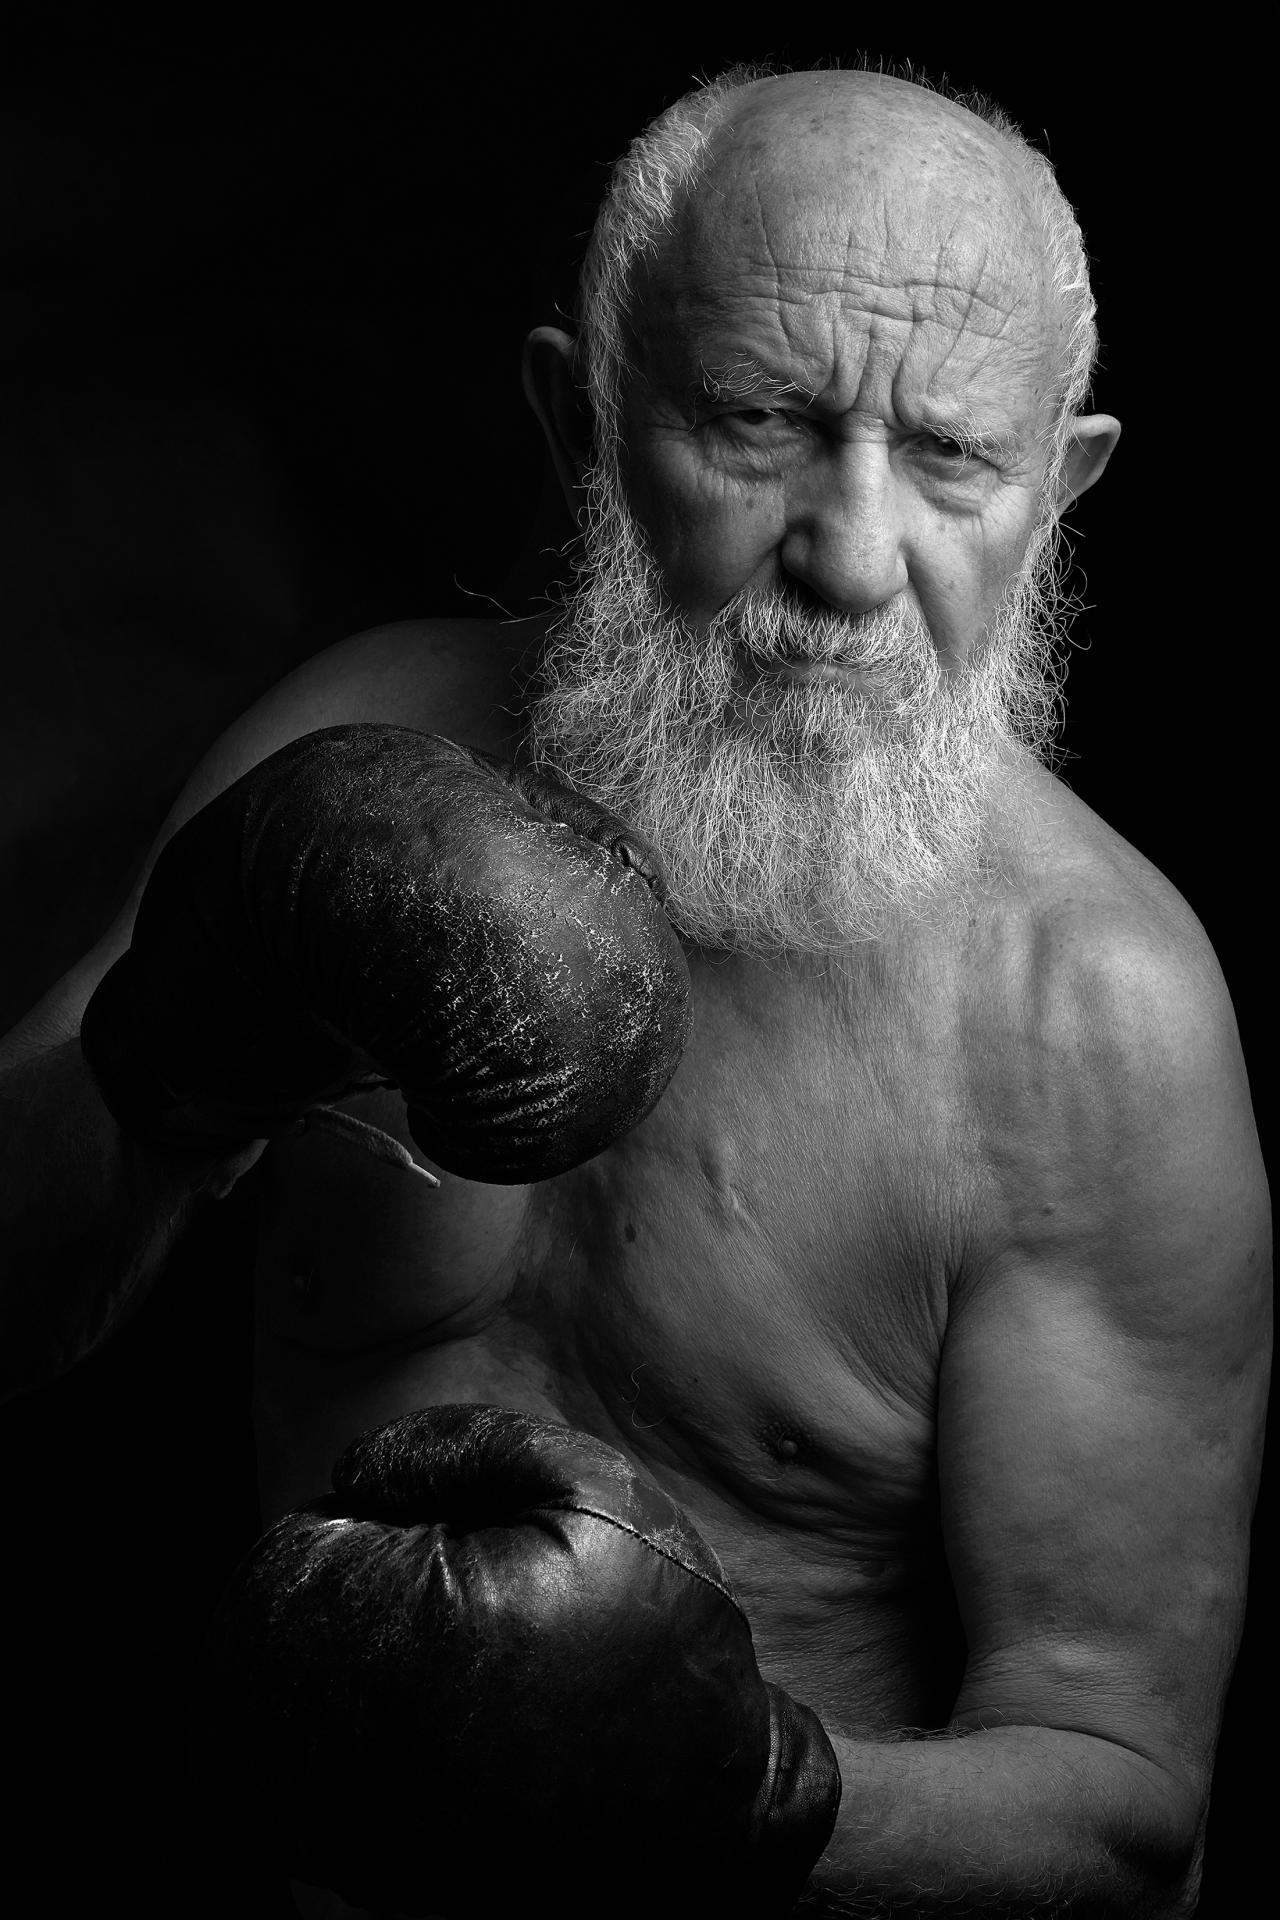 London Photography Awards Winner - Portraits of famous and interesting personalities Ukraine